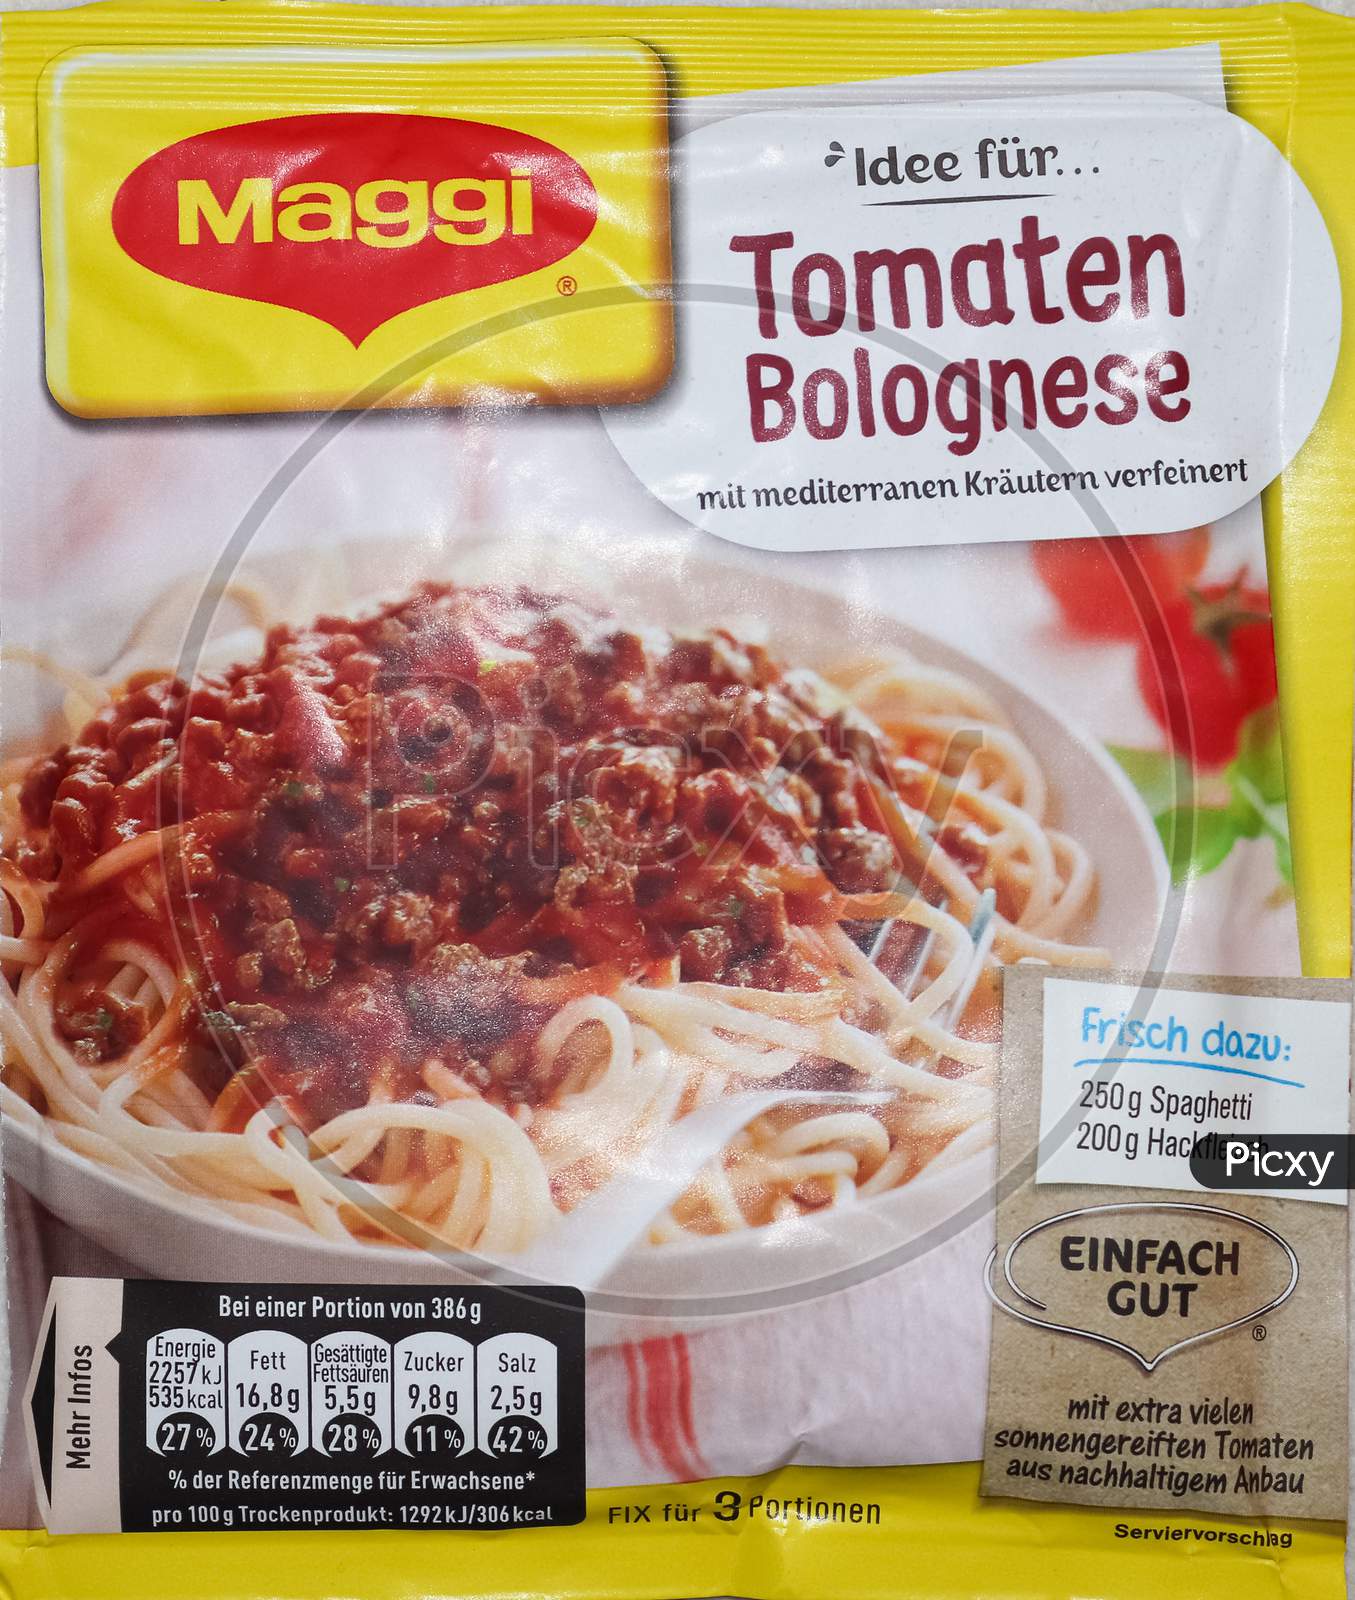 German Maggi Instant Noodles Called Spaghetti Bolognese, Owned By Nestle. Maggi Is An International Brand Of Soups, Stocks, Bouillon Cubes, Ketchup, Sauces, Seasonings And Instant Noodles.